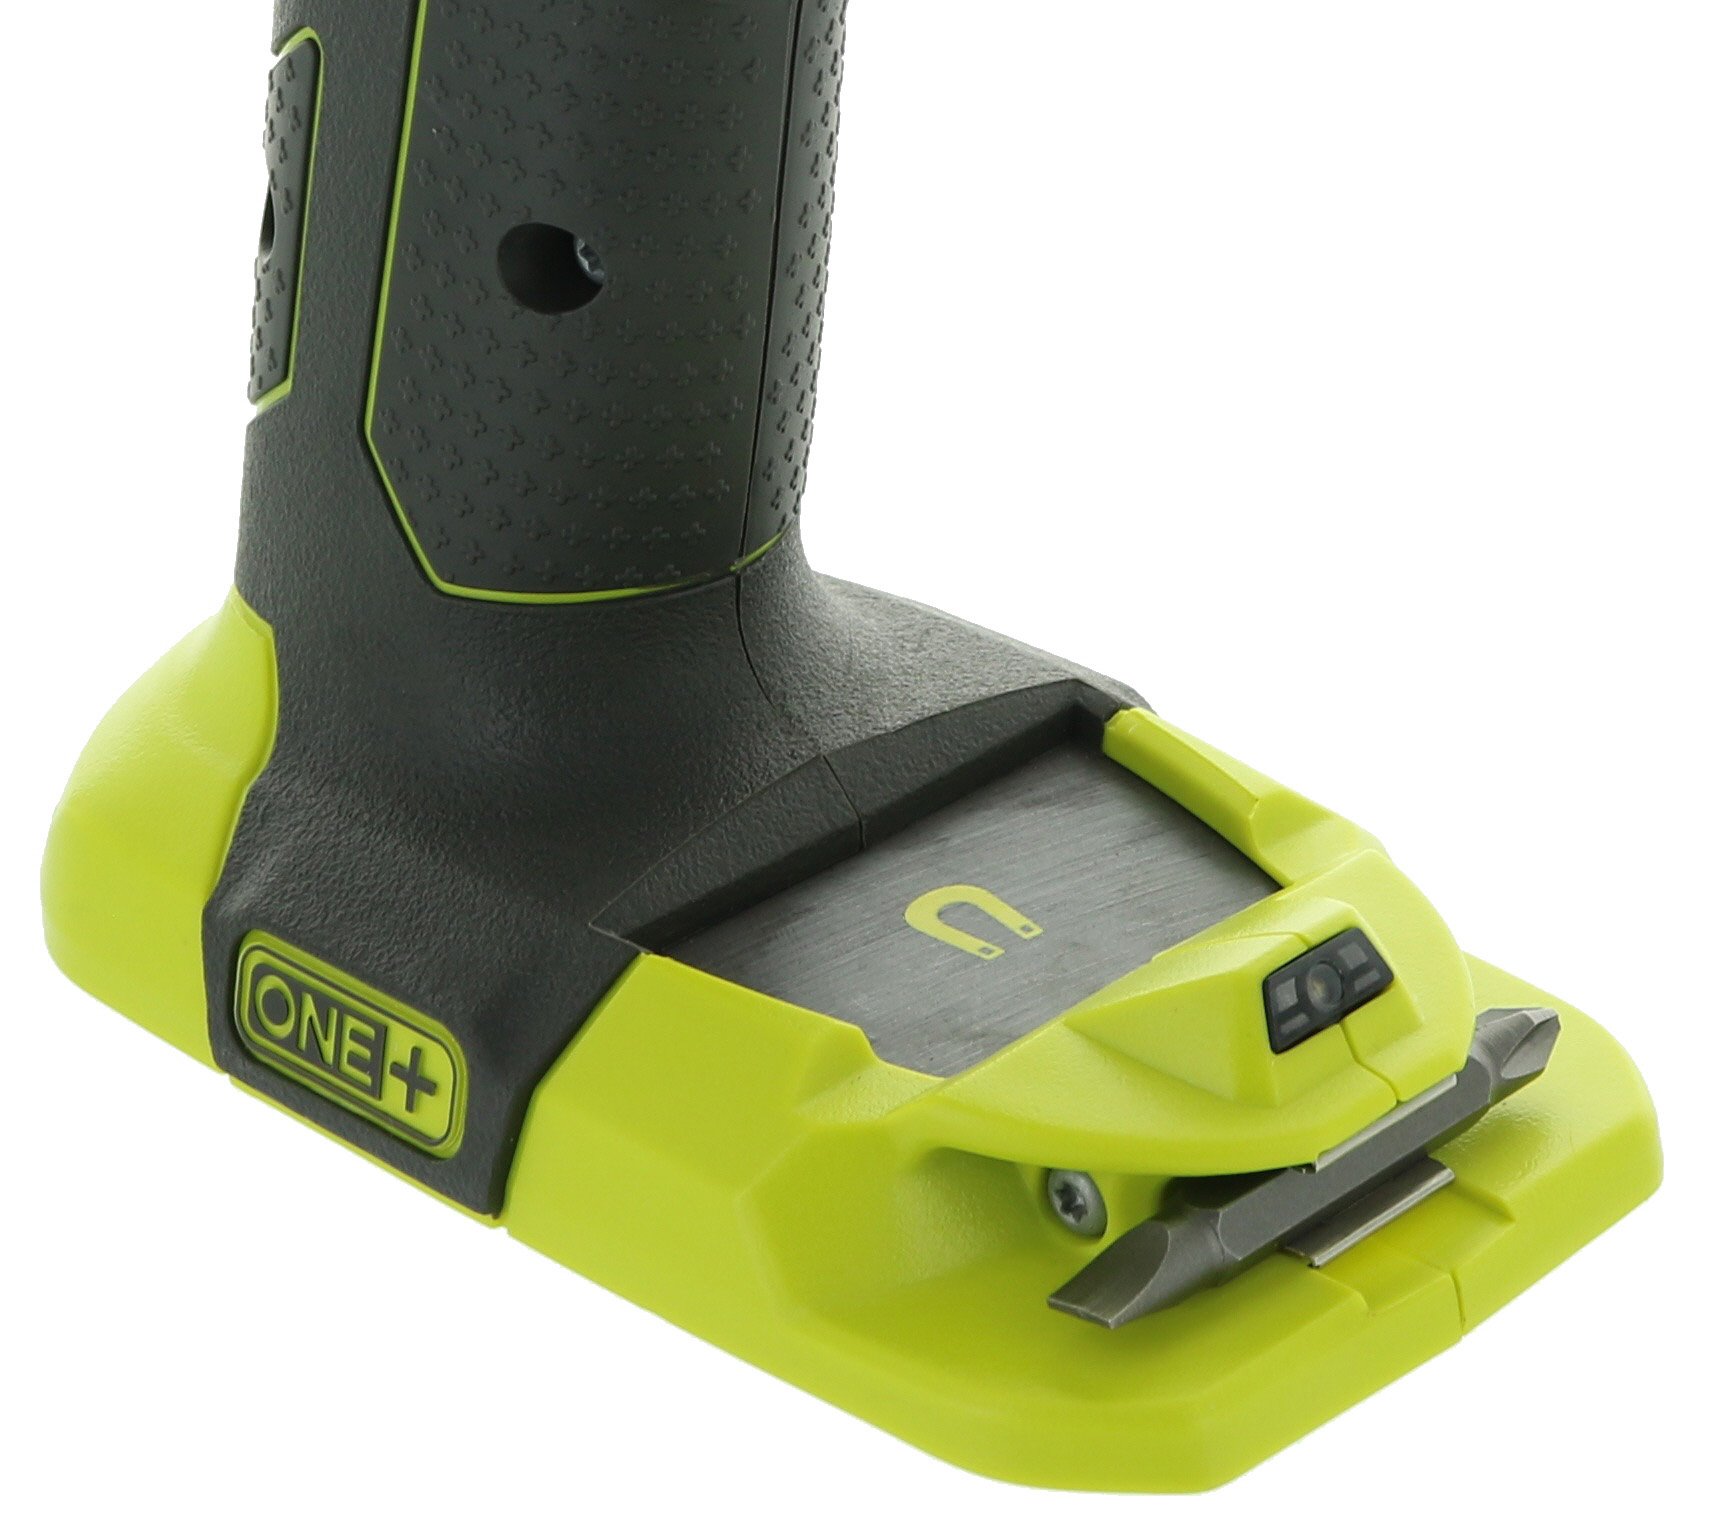 Ryobi P208 One+ 18V Lithium Ion Drill/Driver with 1/2 Inch Keyless Chuck (Batteries Not Included, Power Tool Only)